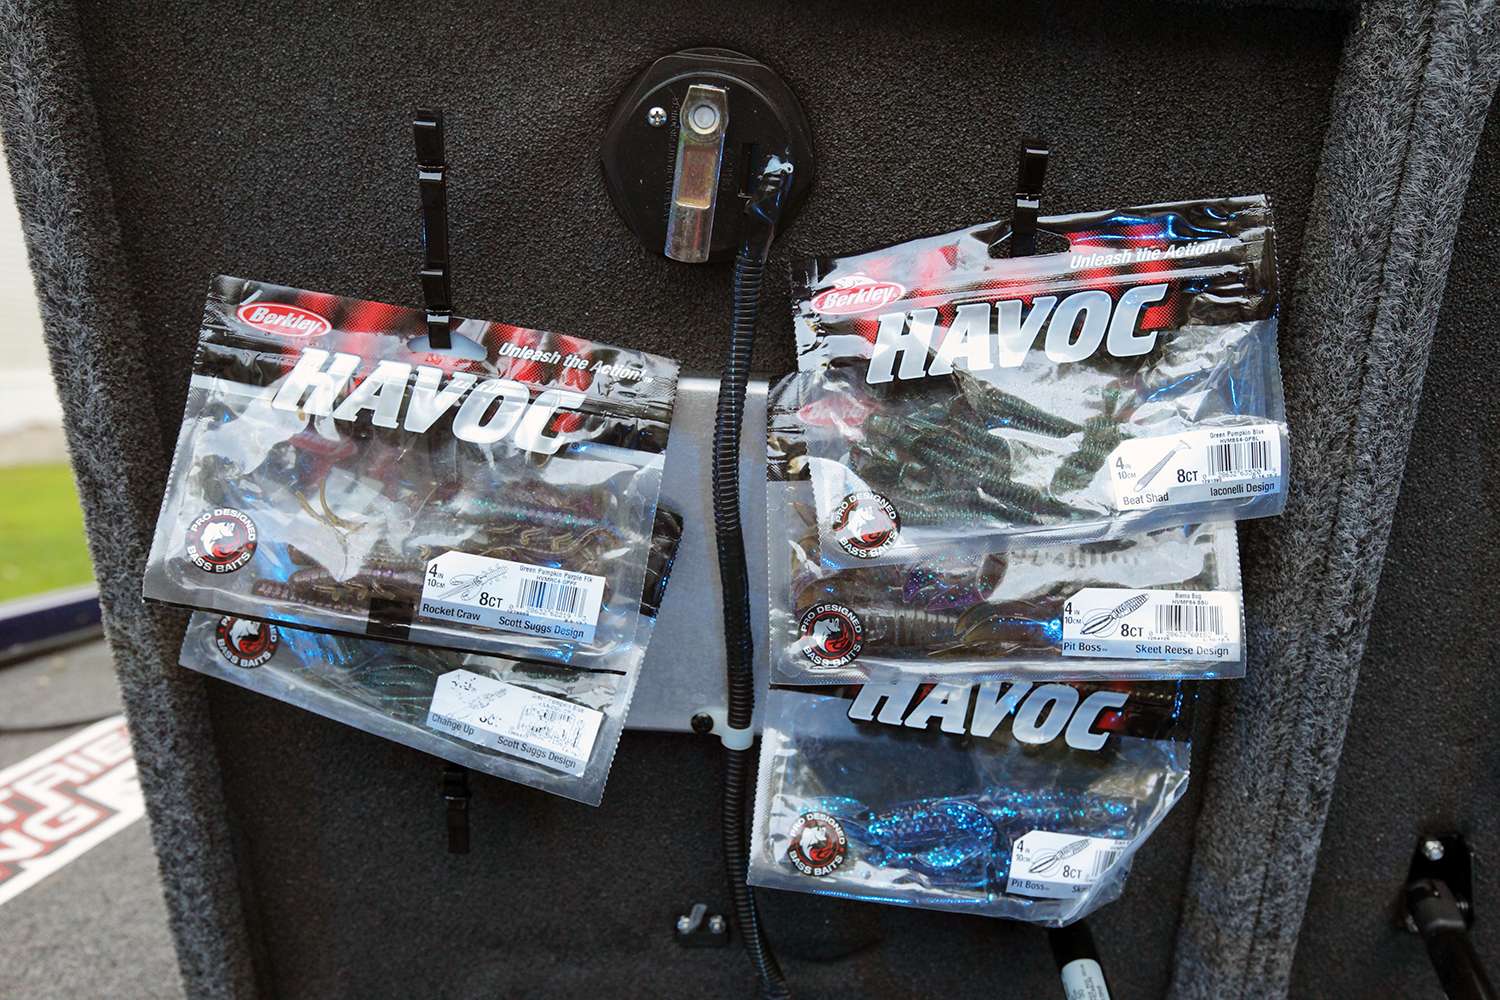 Rows of clips inside the compartment's lids provided handy access to bags of soft baits.